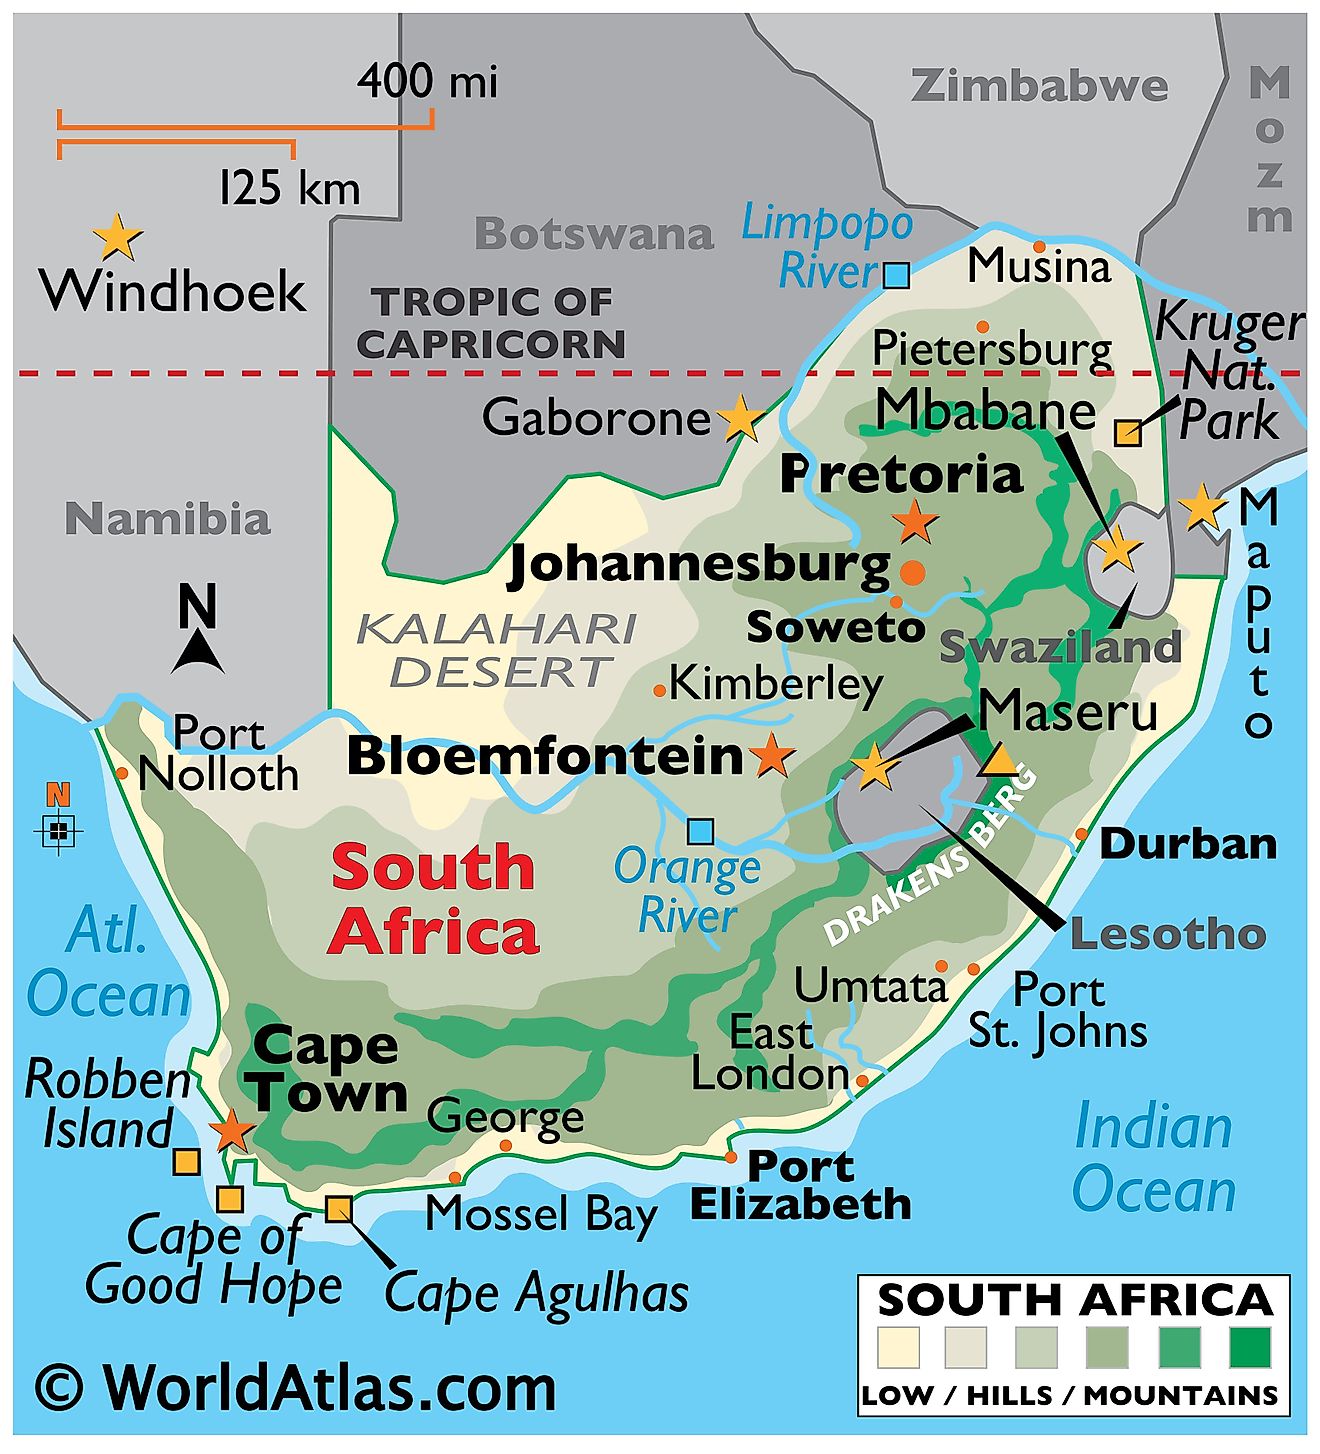 Maps and facts of South Africa